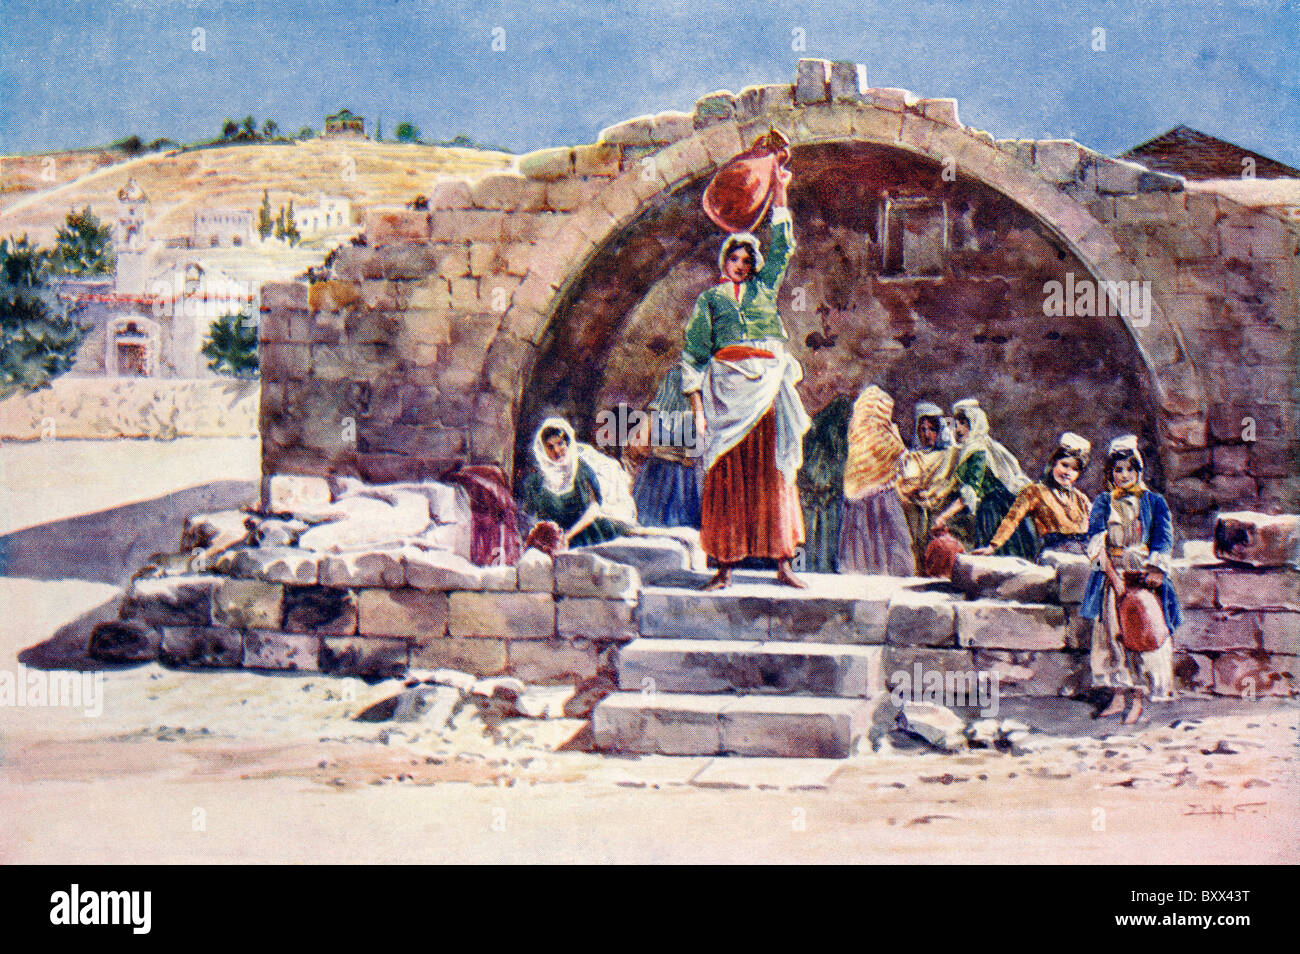 The Fountain of the Virgin, Nazareth, circa 1910.  Legend tells that the Virgin Mary washed the swaddling clothes of Jesus here. Stock Photo